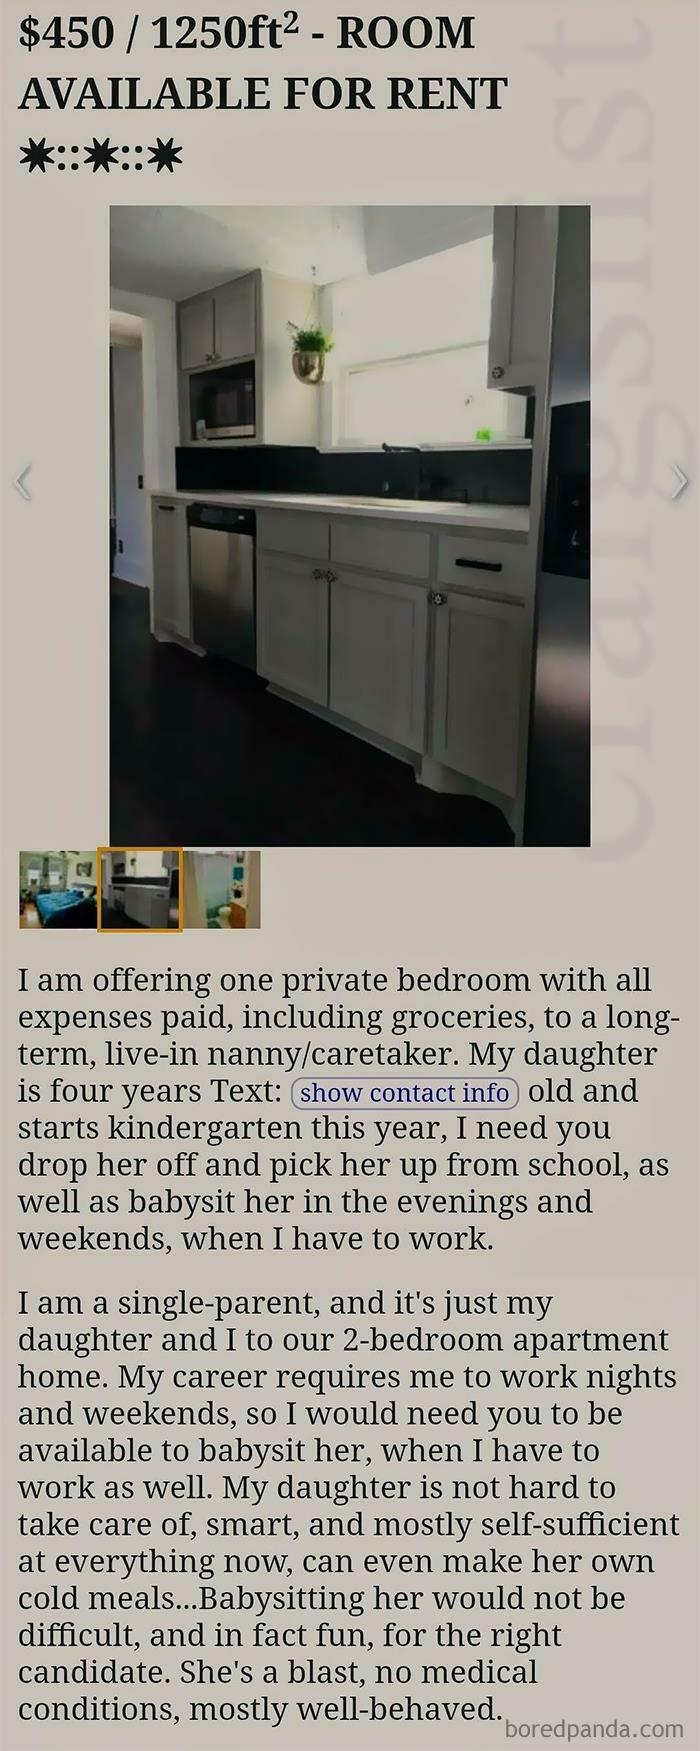 Pay You $450 For The Fantastic Opportunity To Babysit Your Kid?!